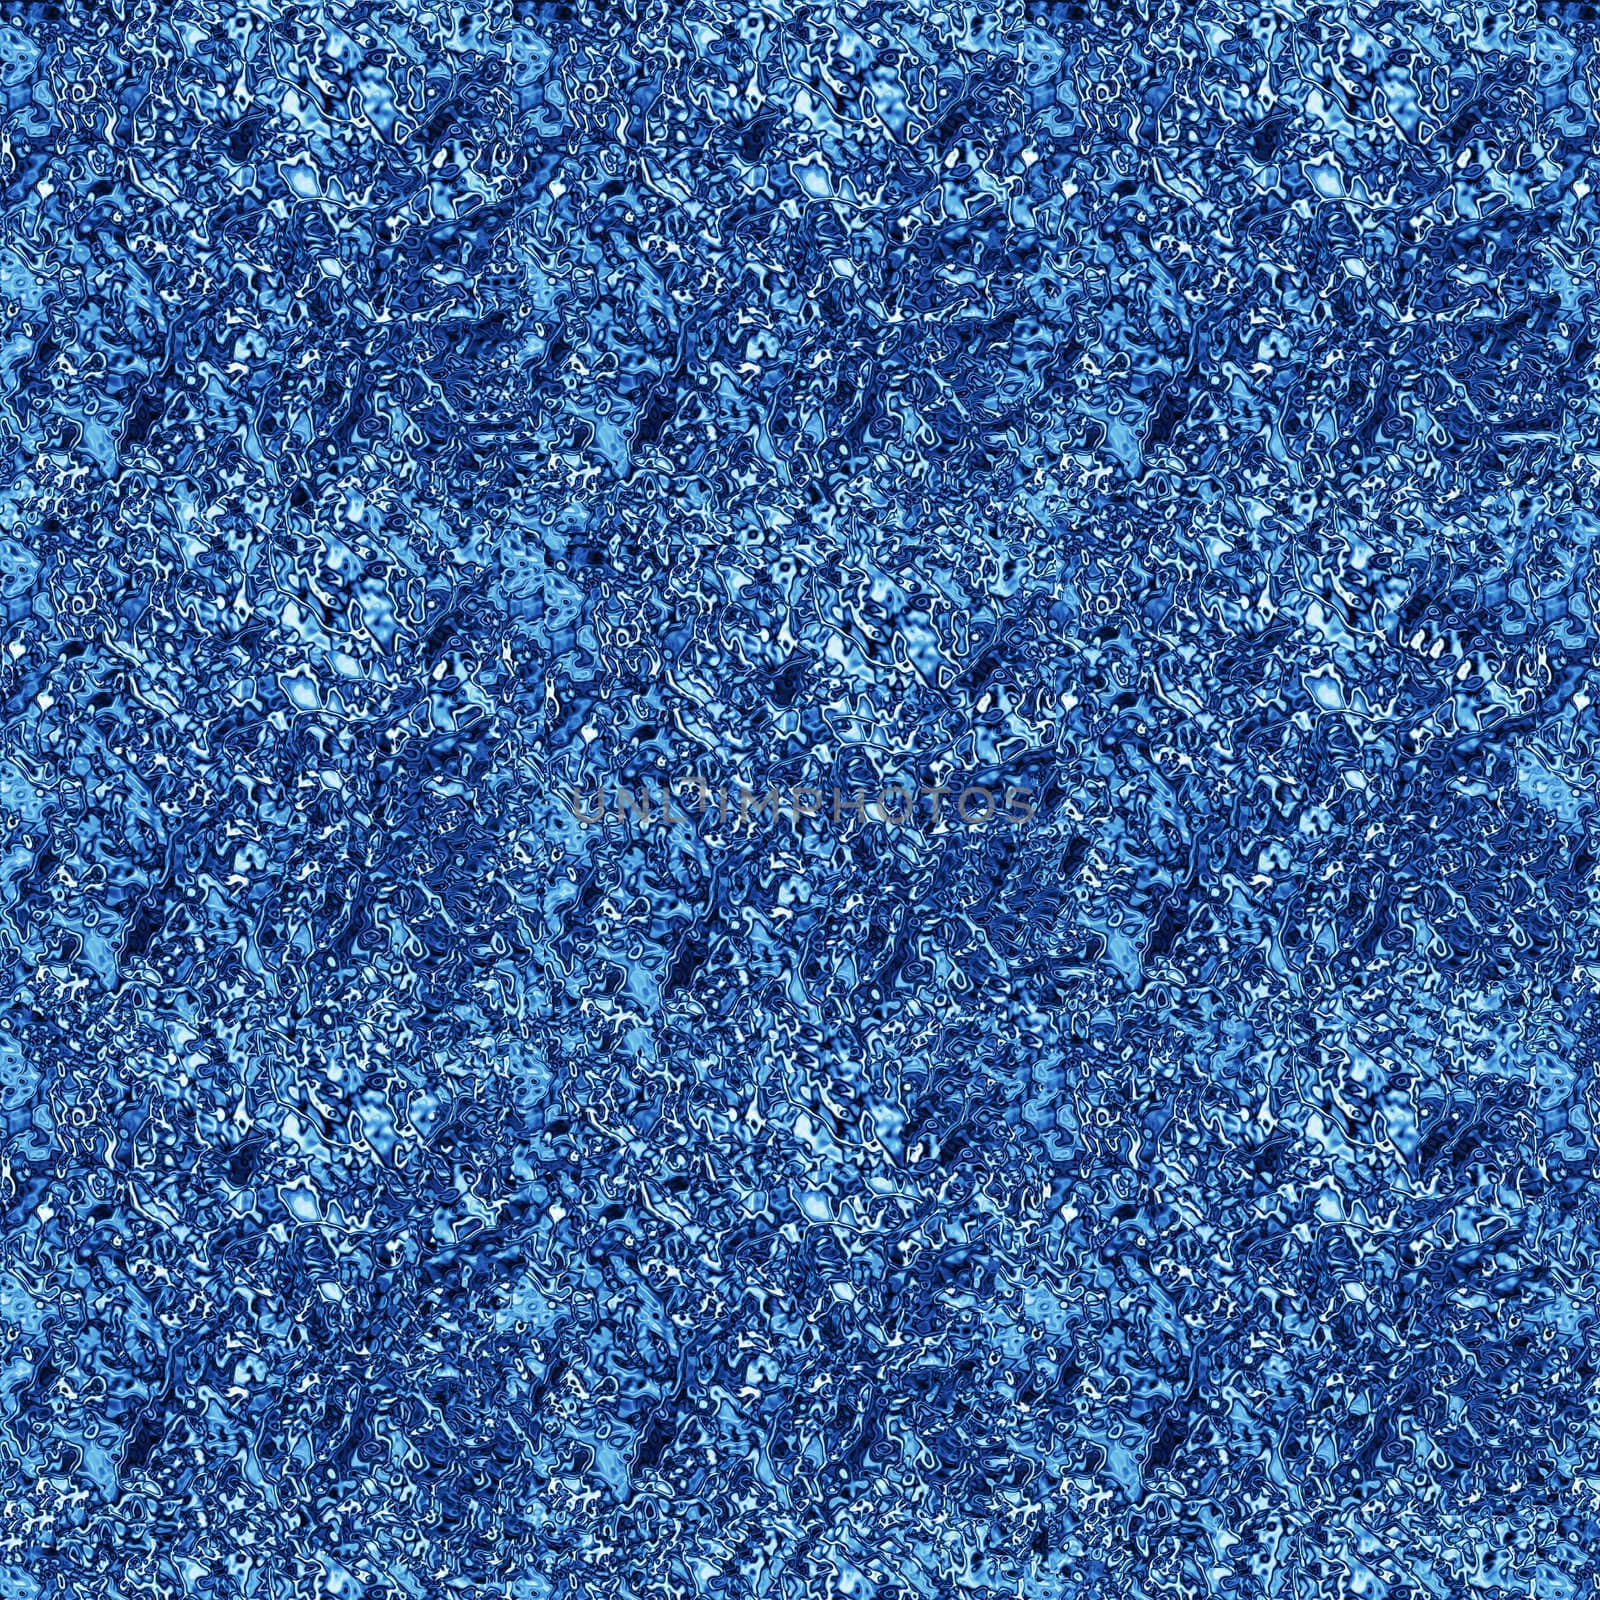 Image of an abstract waterlike texture.